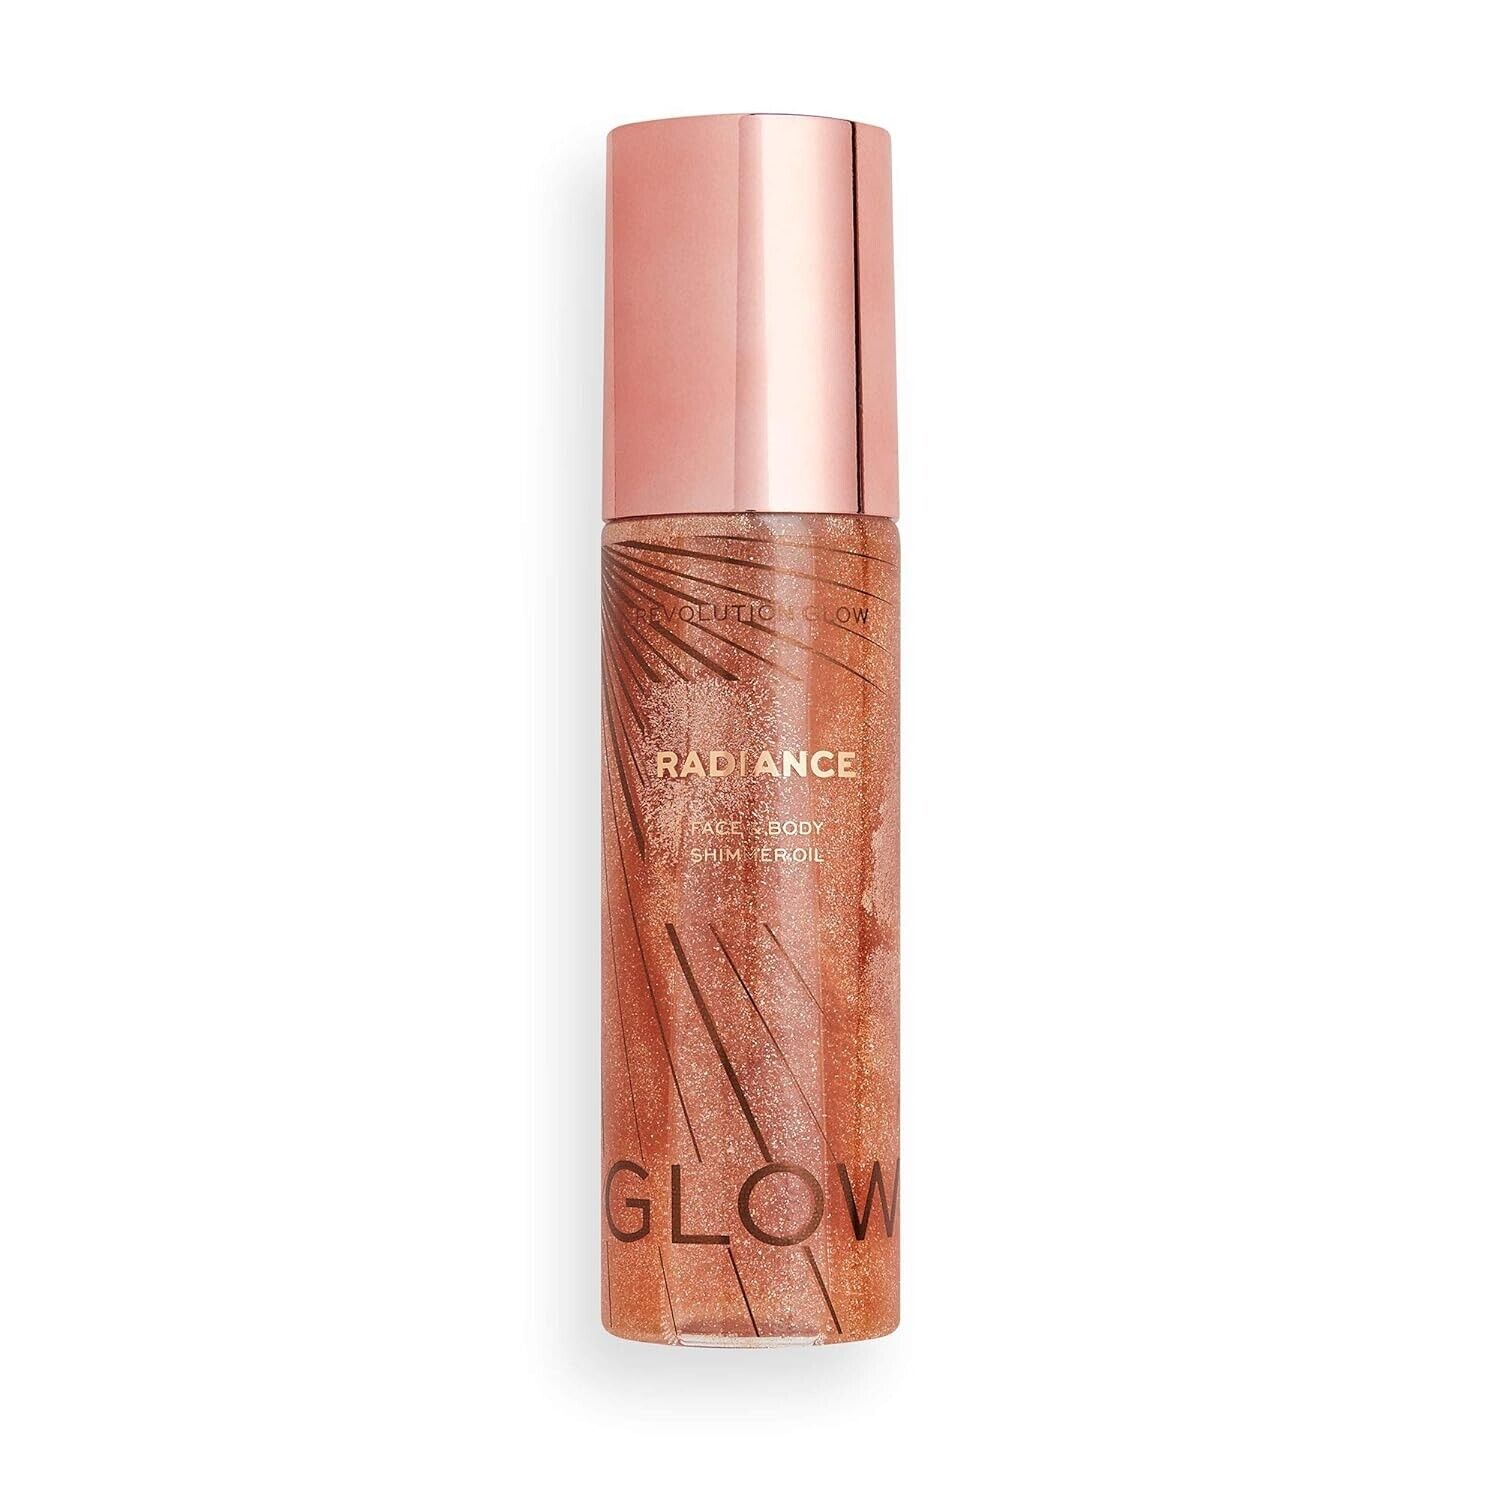 NIB Radiance ~ GLOW ~ Face and Body Shimmer Oil  GOLD by Makeup Revolution REVOLUTION GLOW N/A